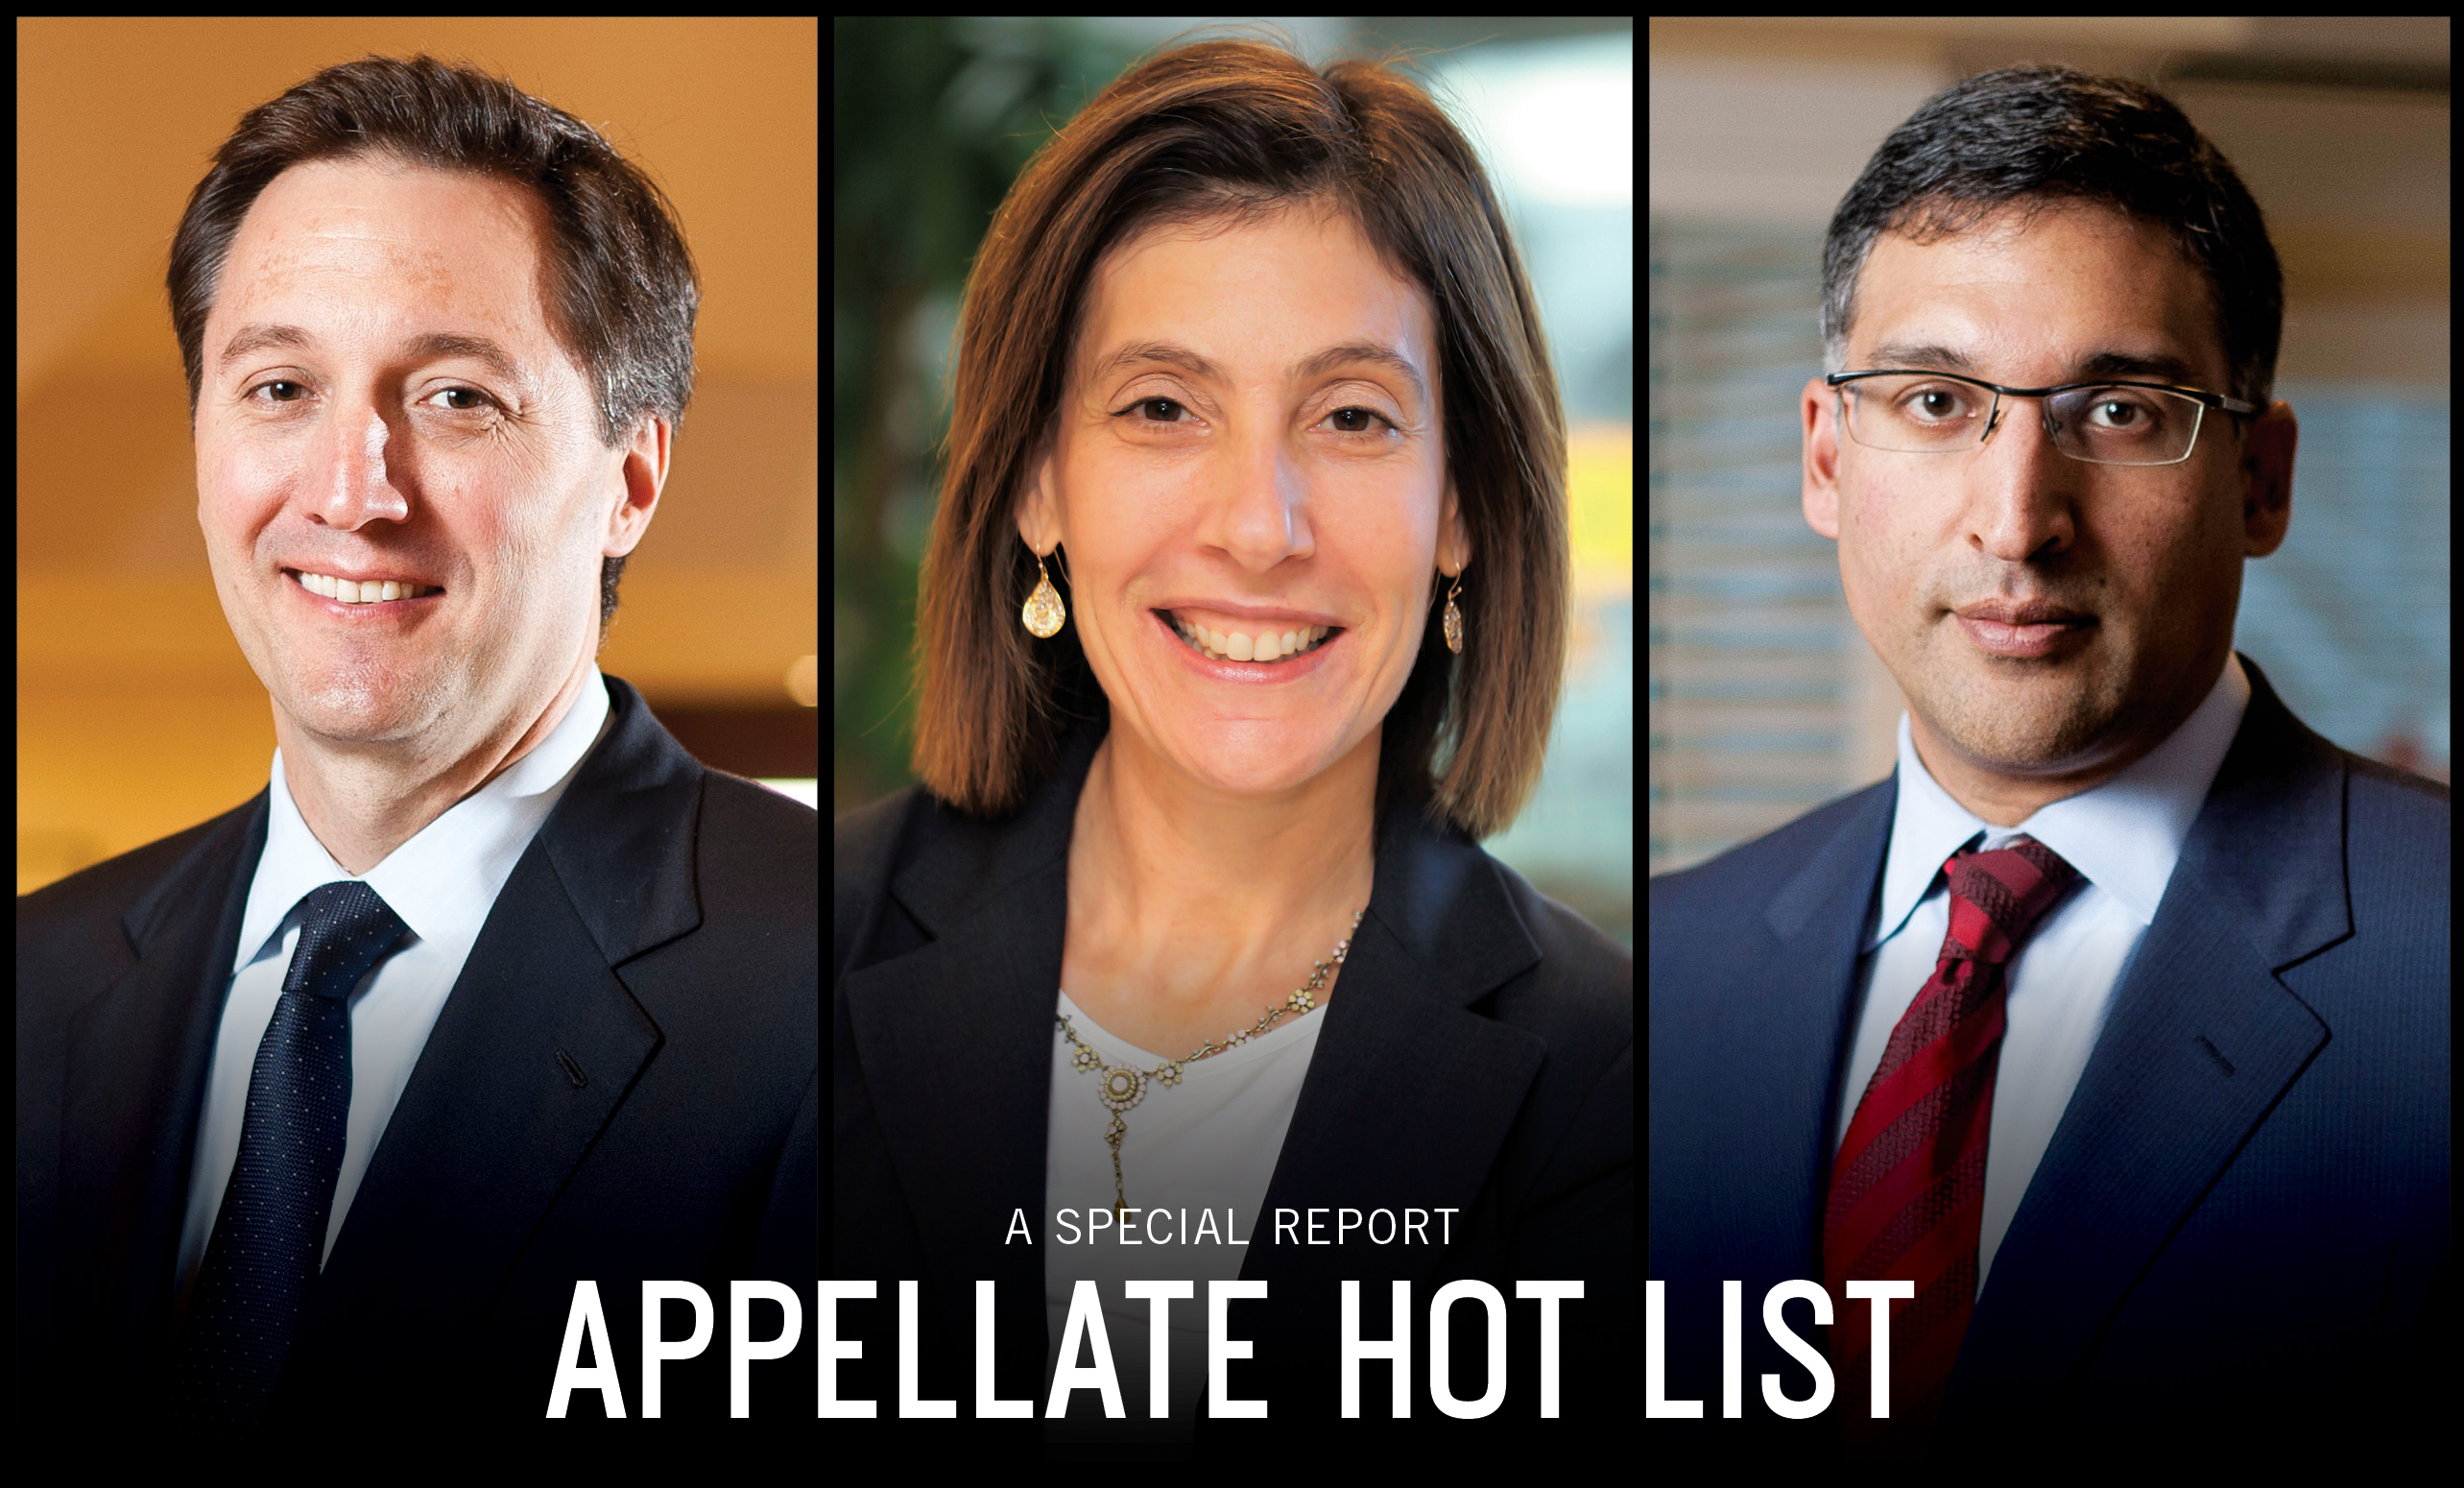 The 2017 Appellate Hot List